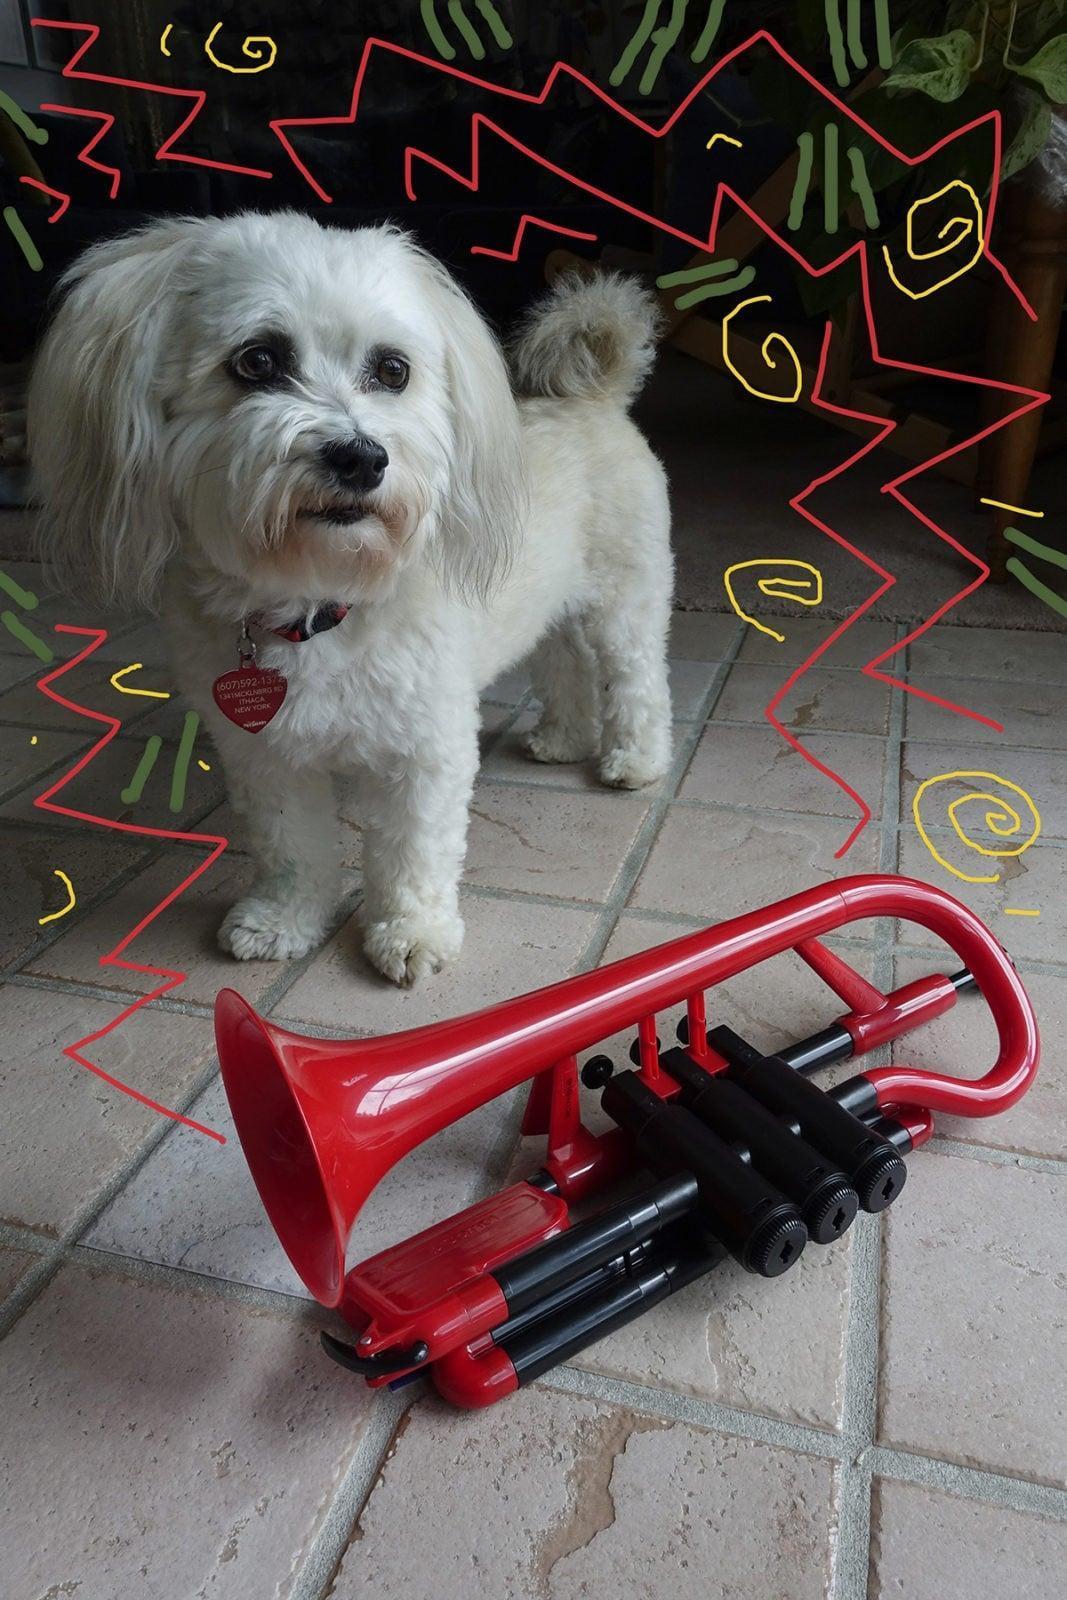 Robin Botie of Ithaca, New York, photoshops her dog and her new red pcornet bought to practice her embouchure for bugle playing.